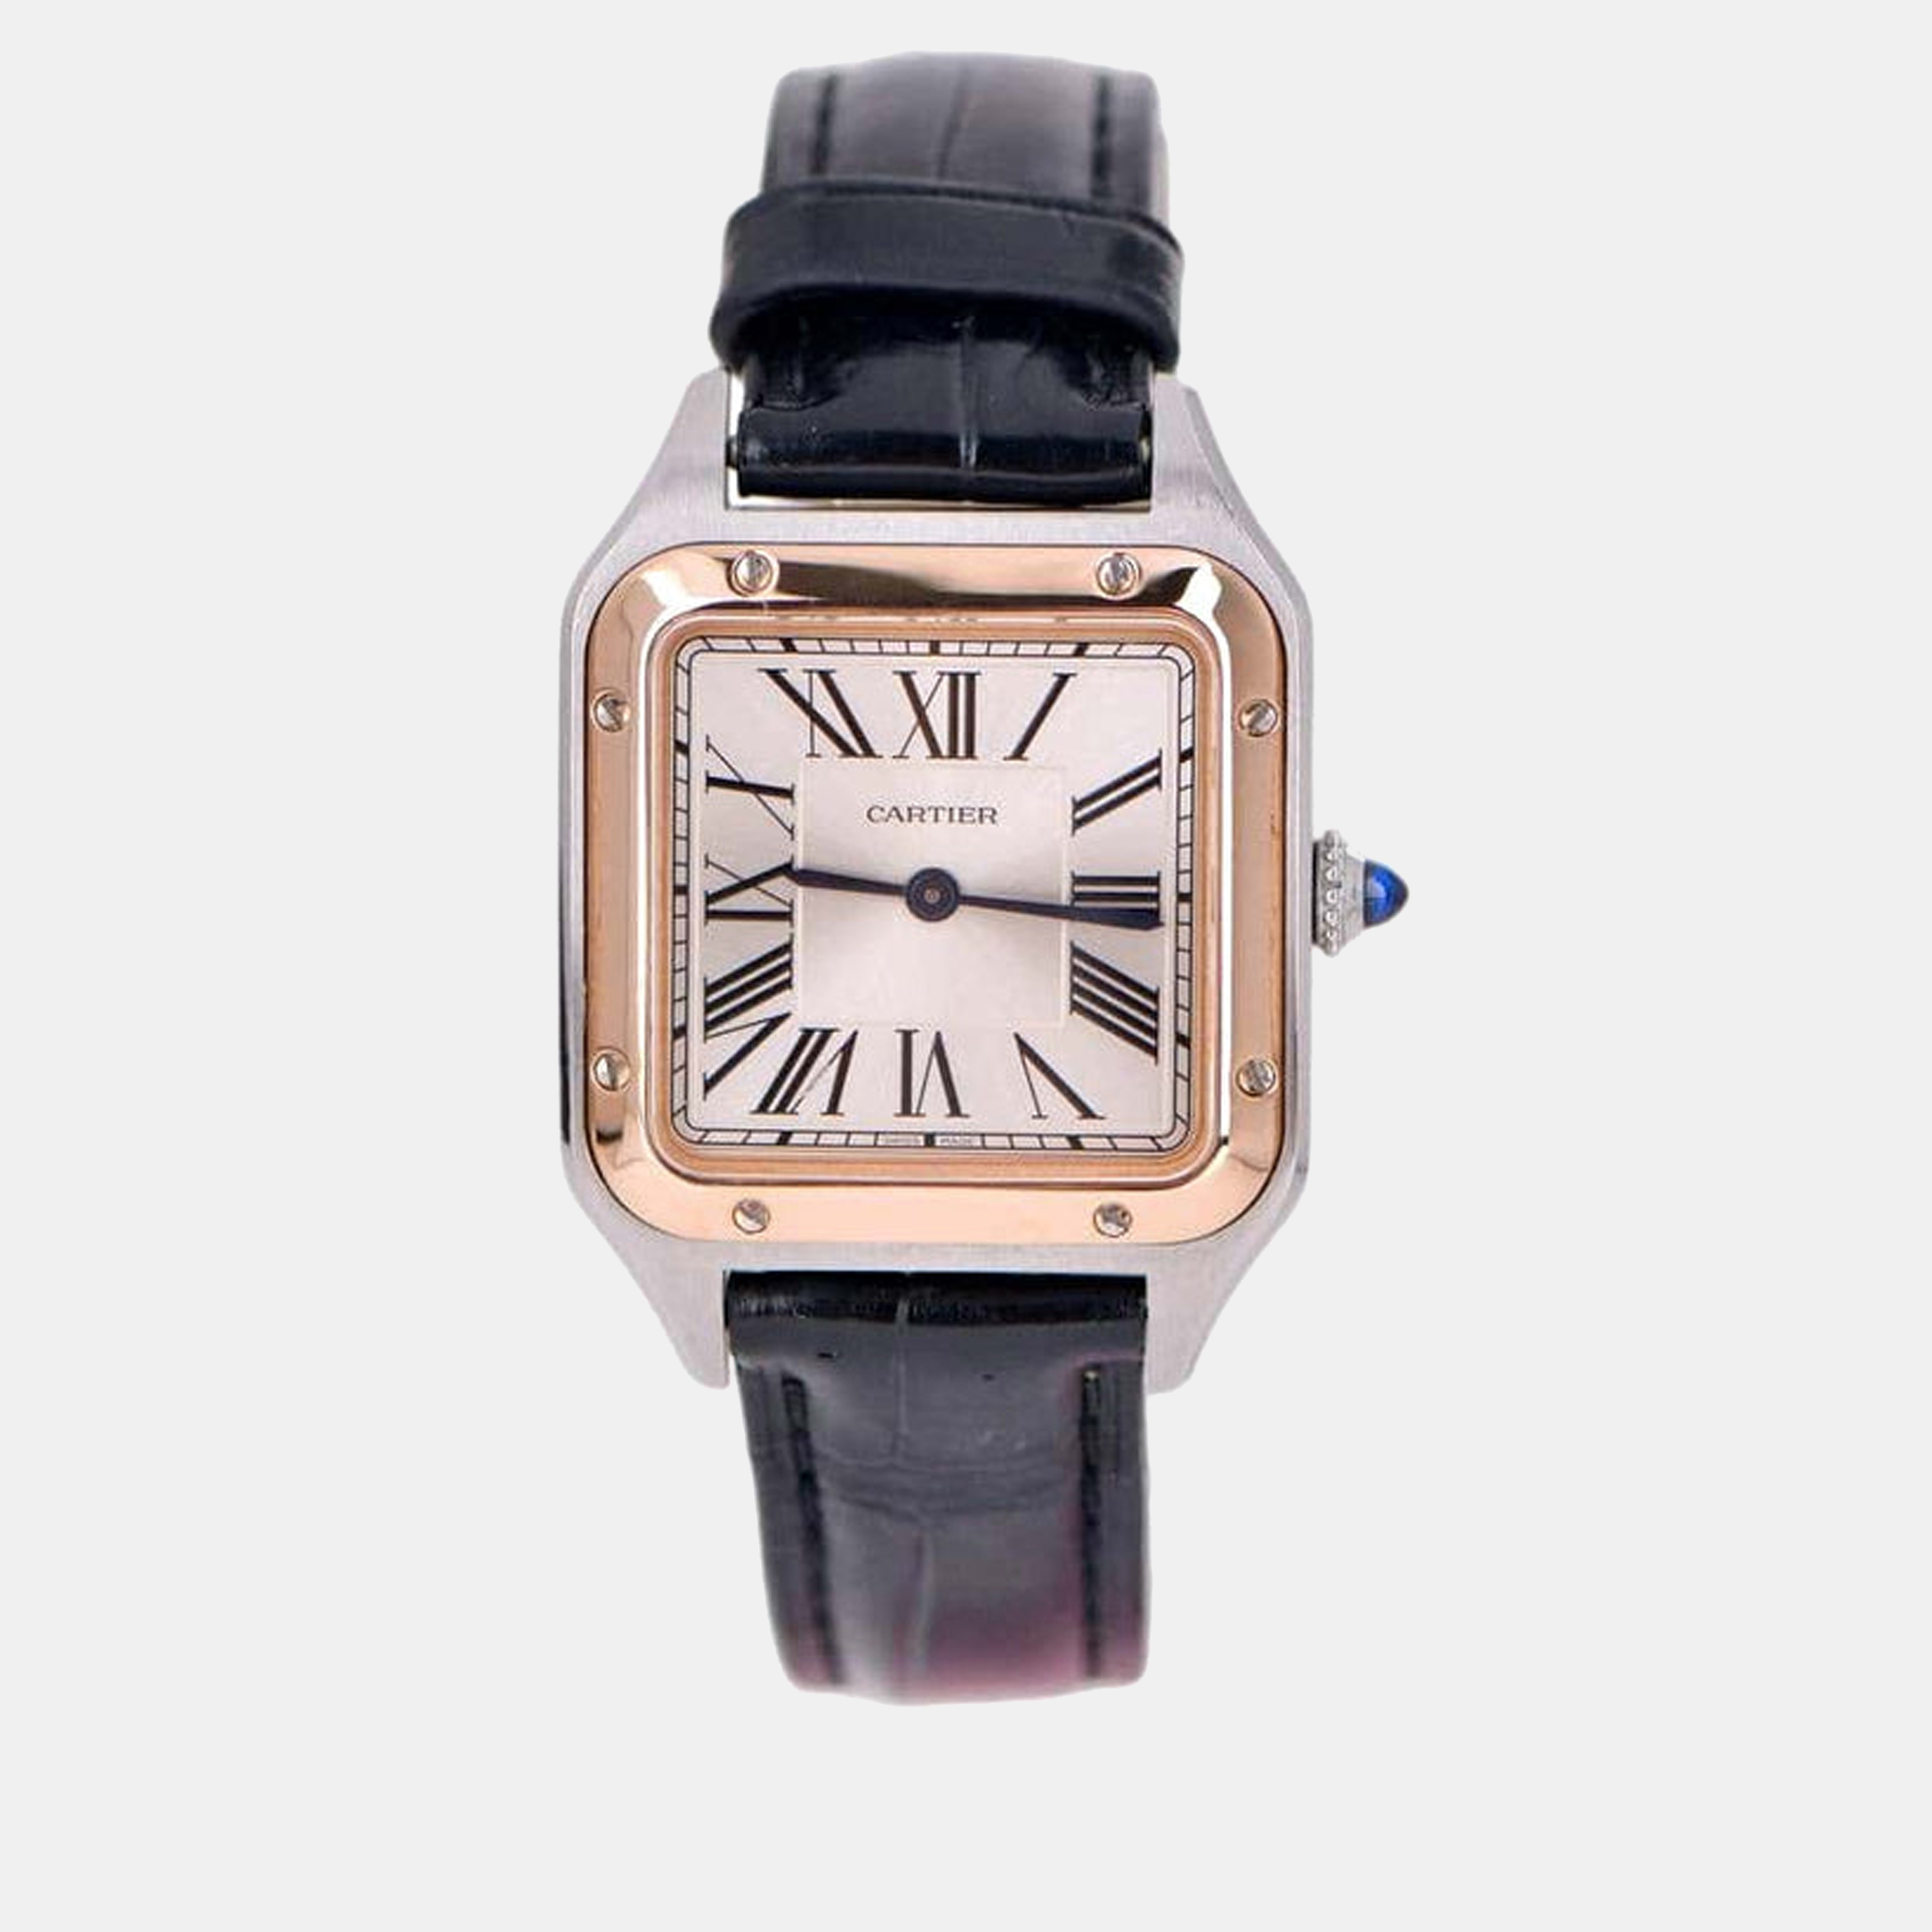 Pre-owned Cartier Santos-dumont Watch Small Model W2sa0012 In Cream